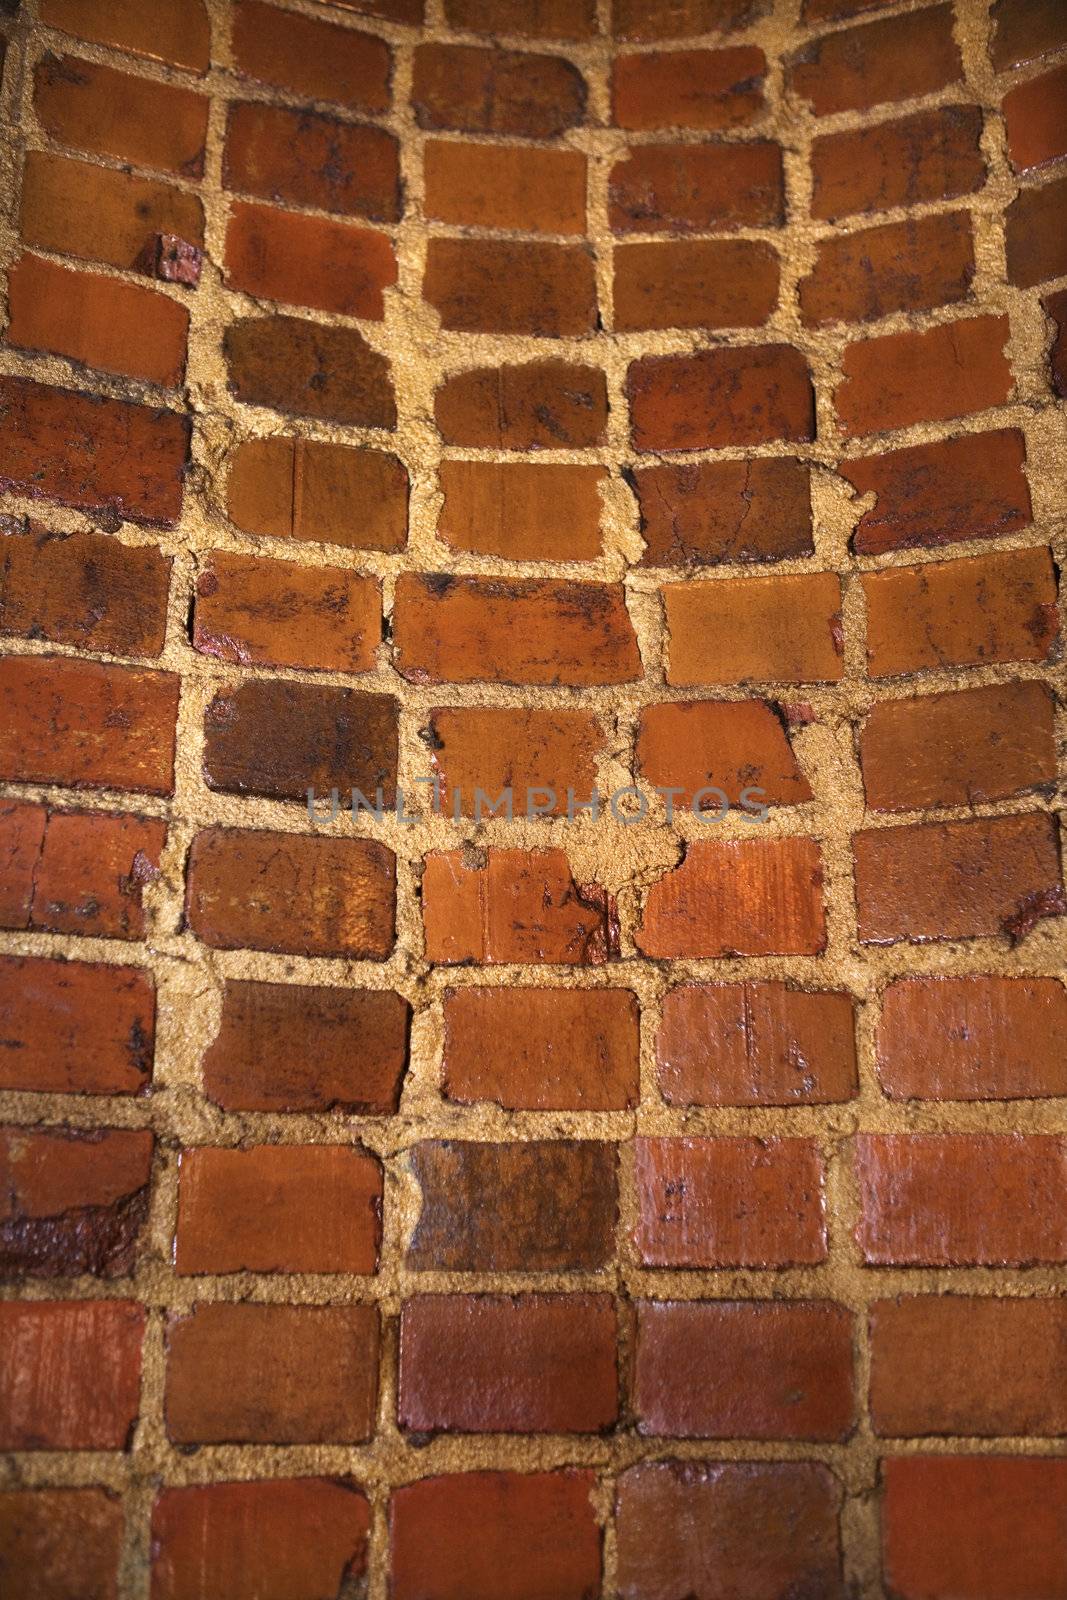 Curved brick wall